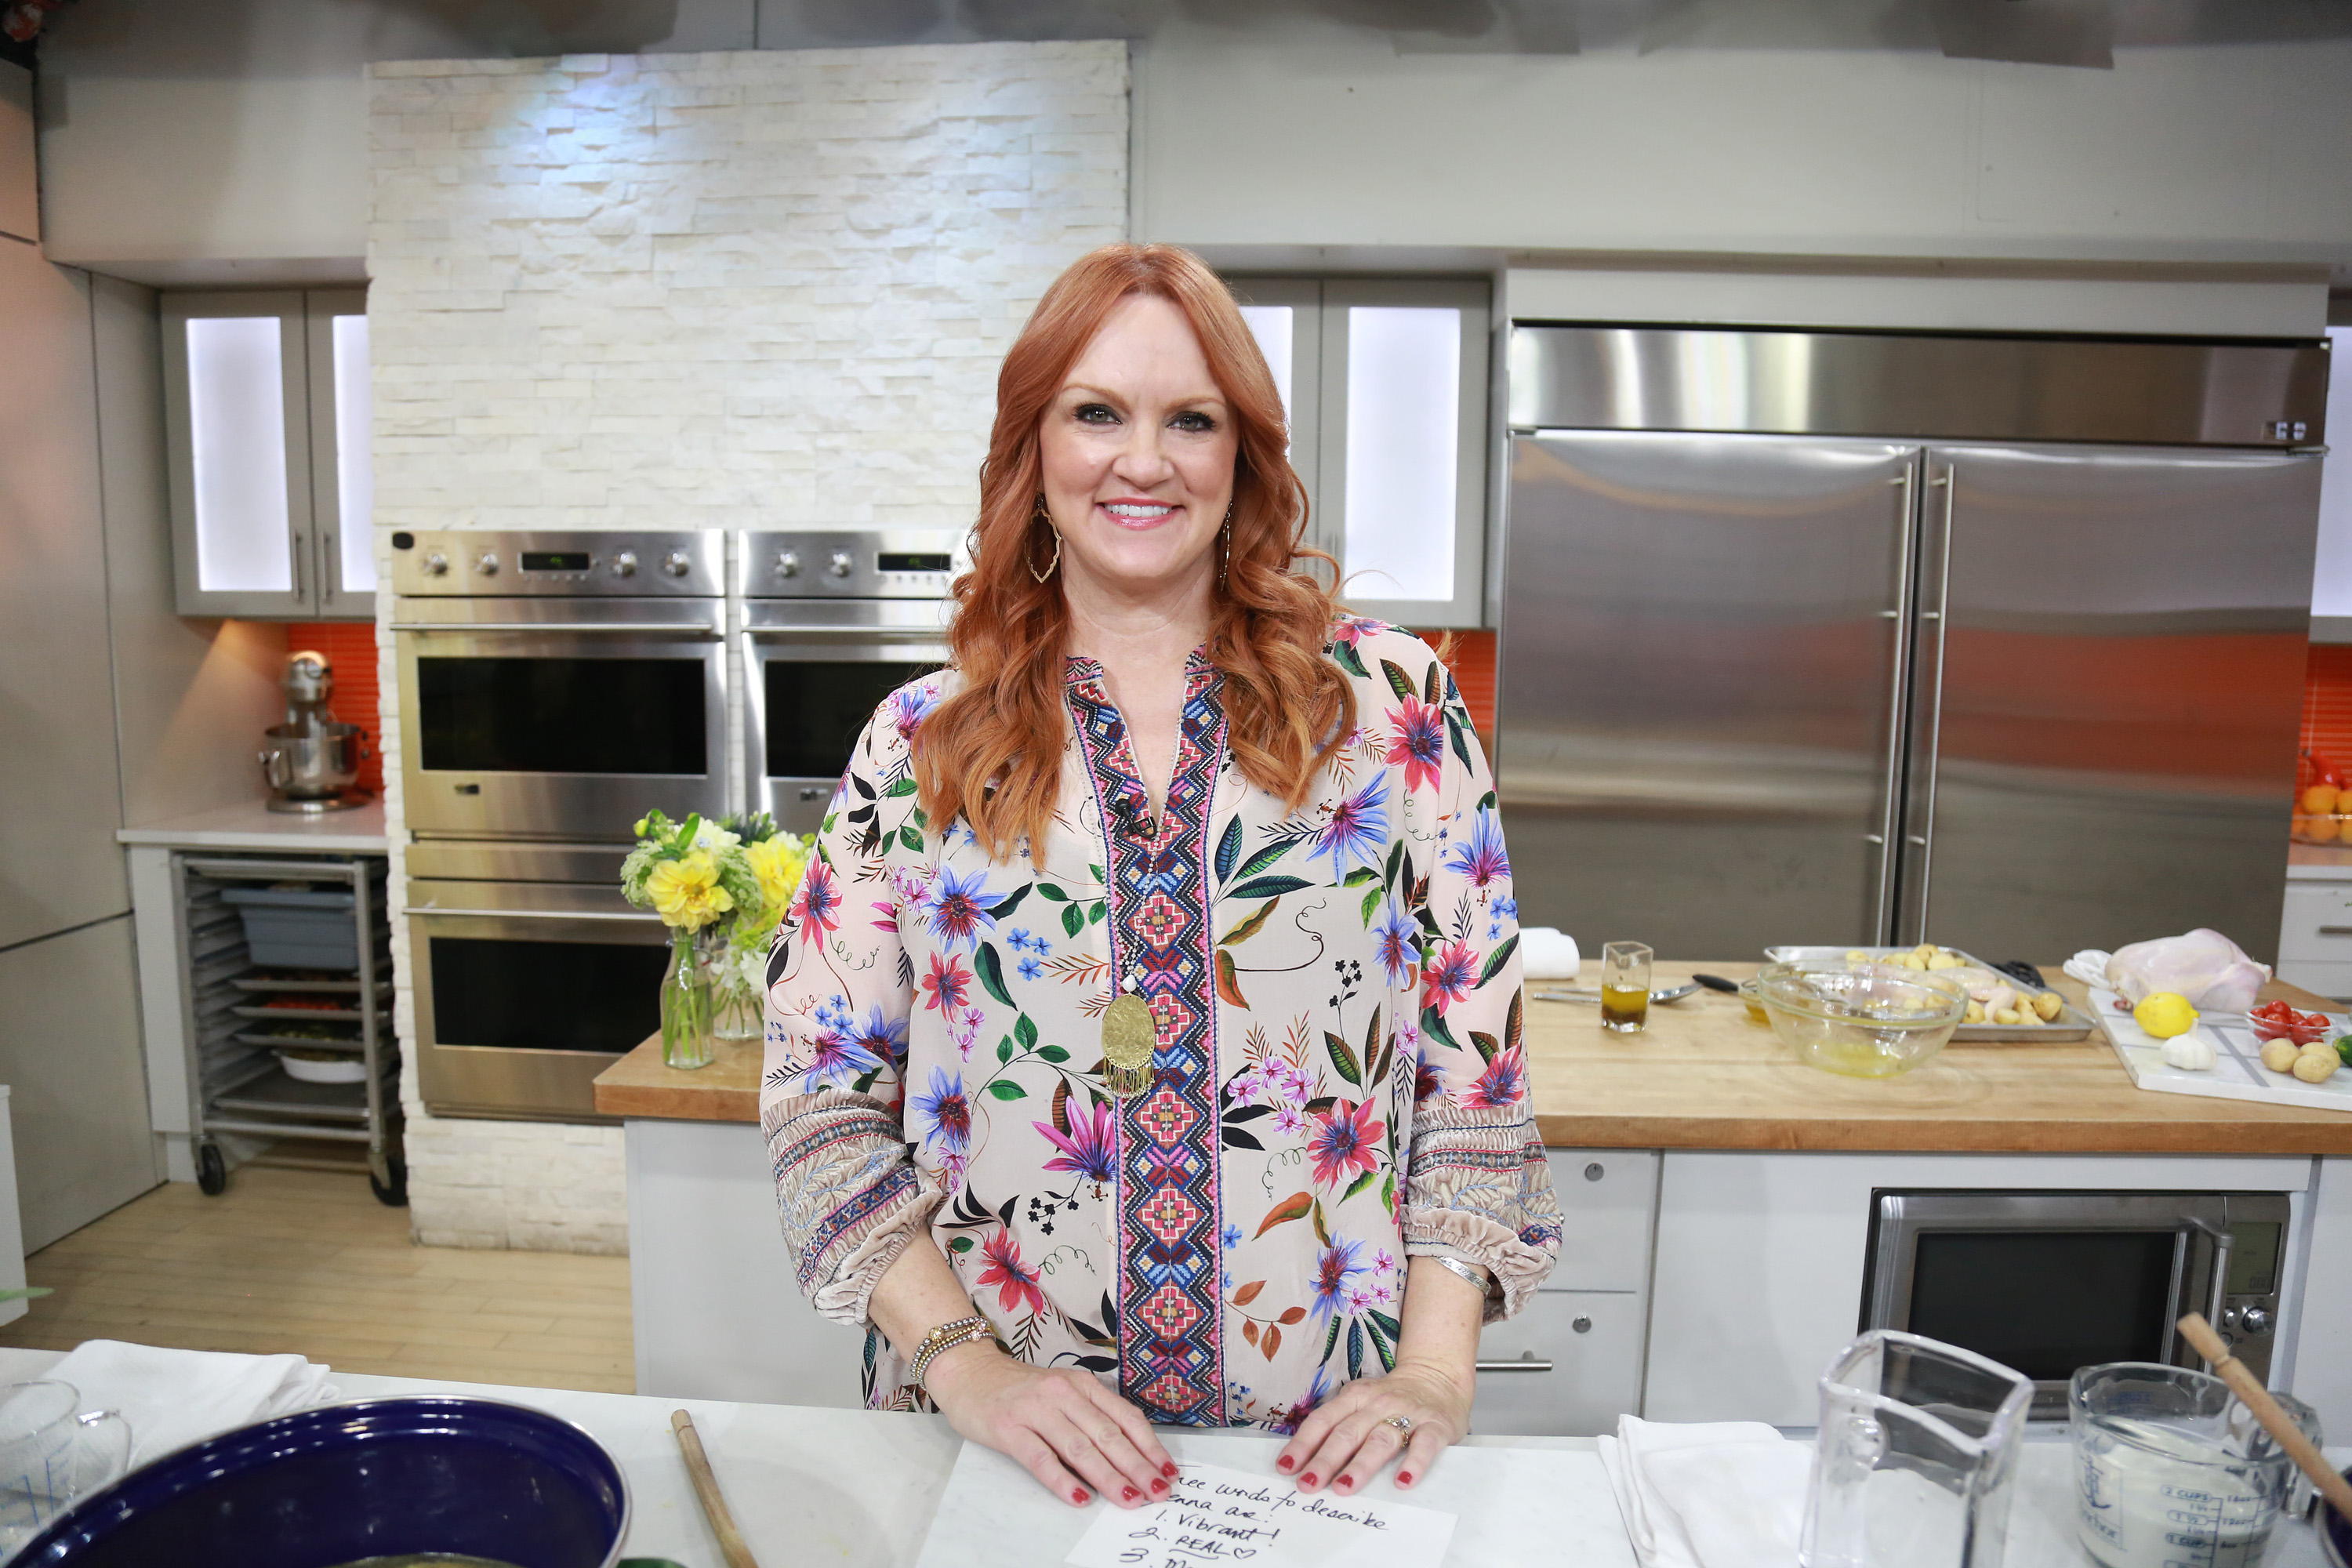 'The Pioneer Woman' Ree Drummond stands in the 'Today' show kitchens, smiling, wearing a brightly colored top, 2019